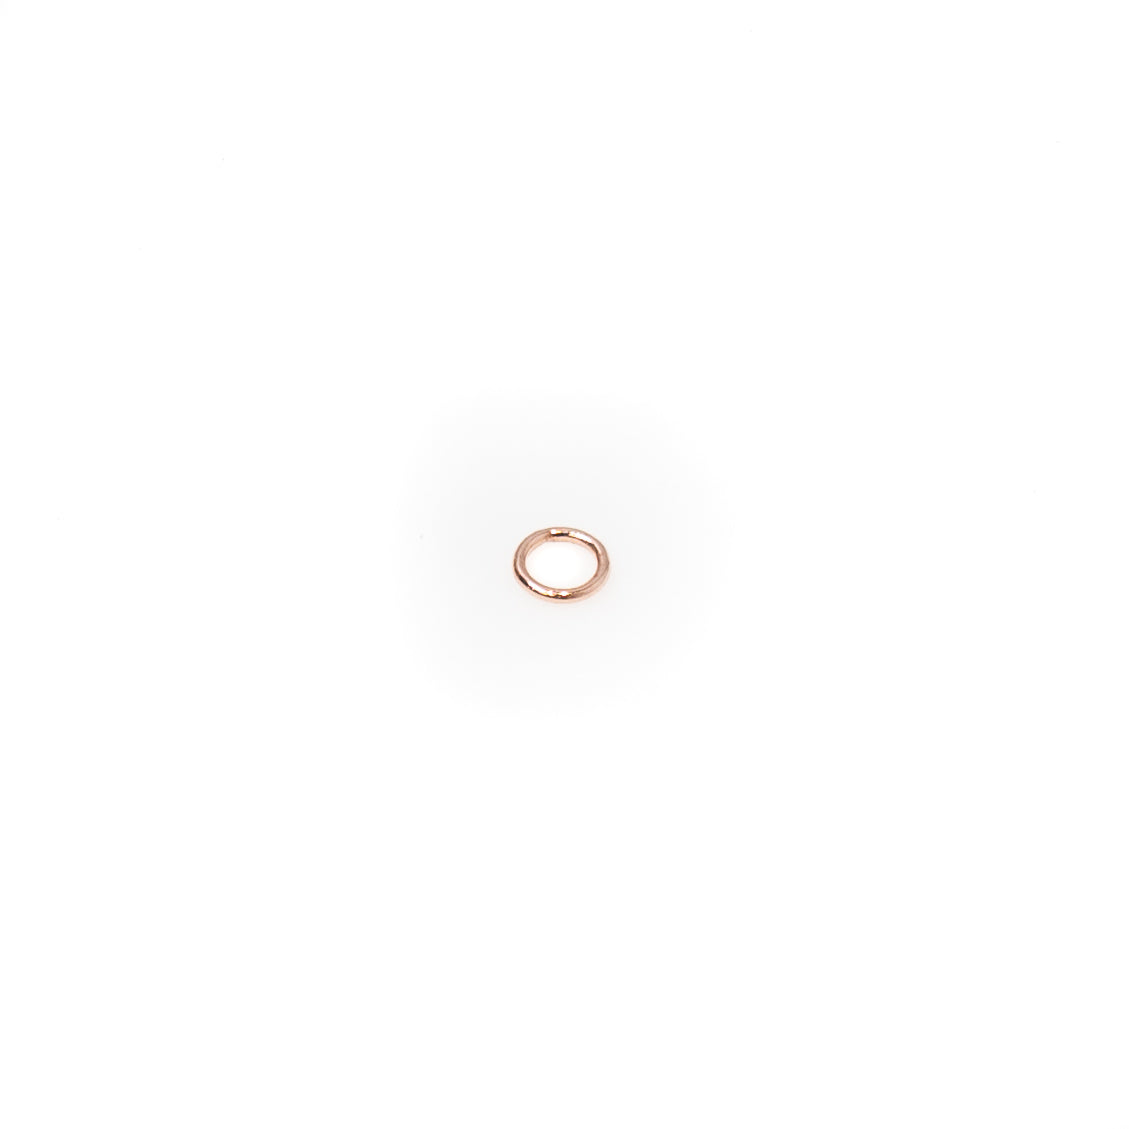 6mm Soldered (Closed) Jump Ring (3 Metal Options Available)